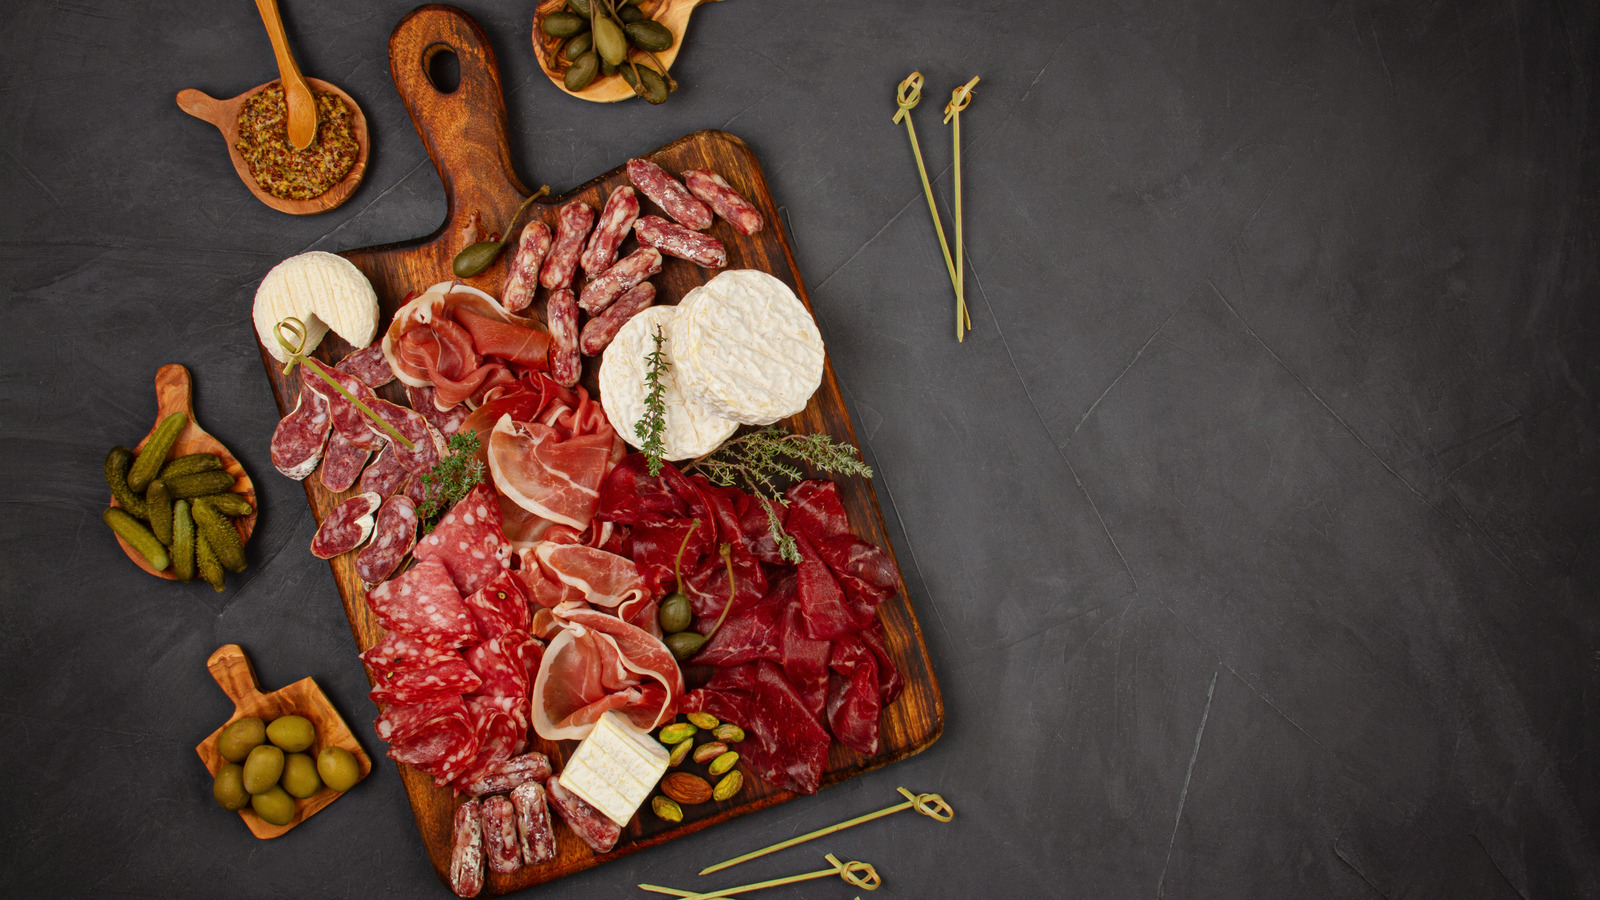 The Best Types Of Meats And Cheeses For Your Charcuterie Board